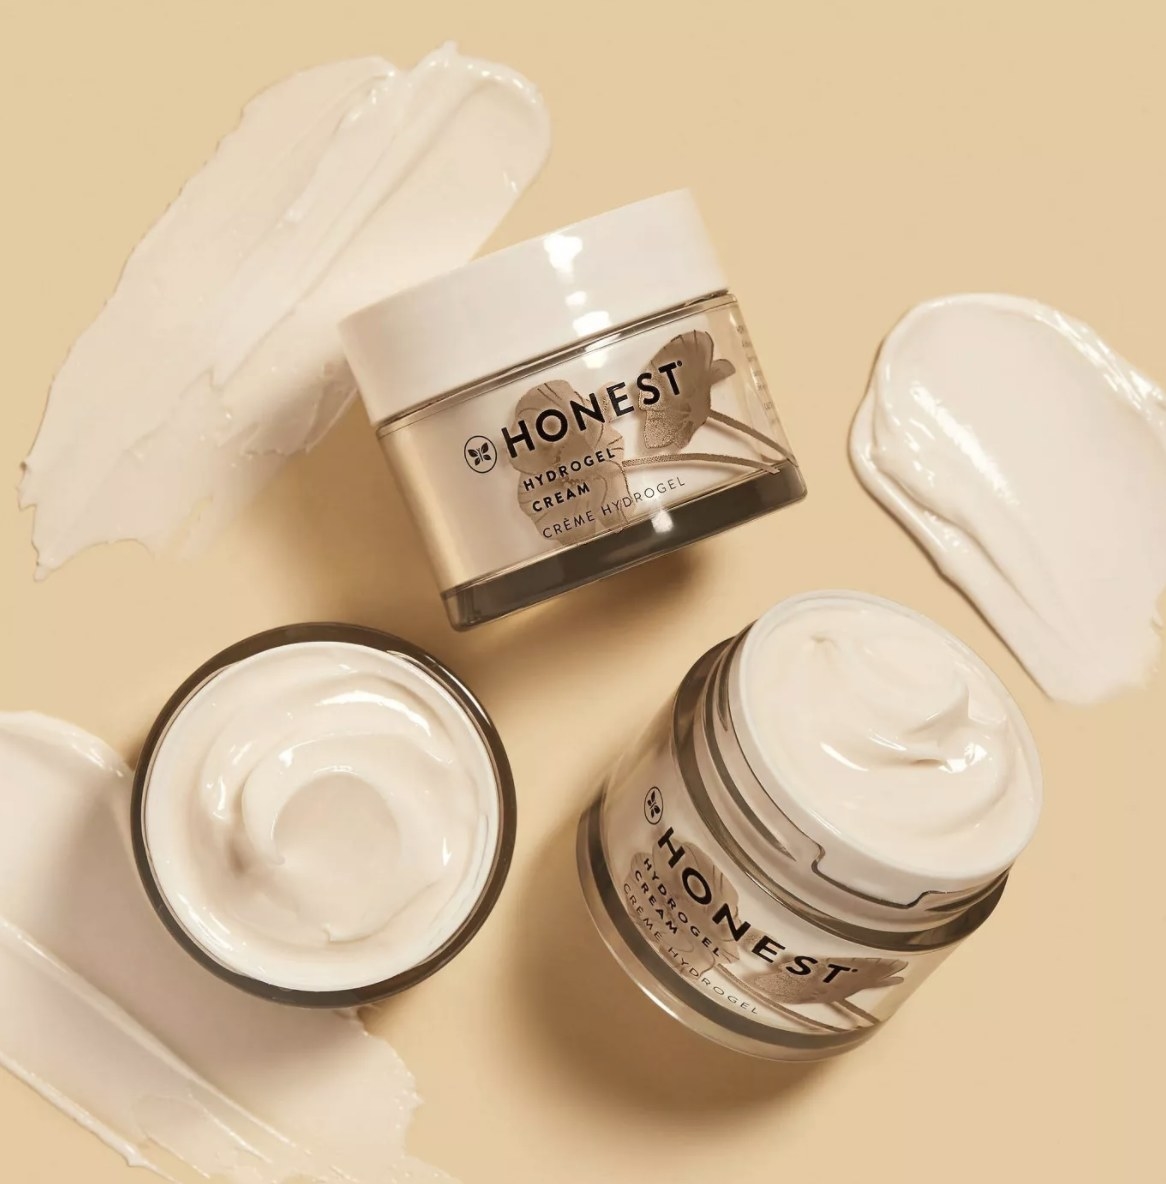 There are three &quot;HONEST&quot; cream jars placed in various positions against a cream background with various swatches in the background